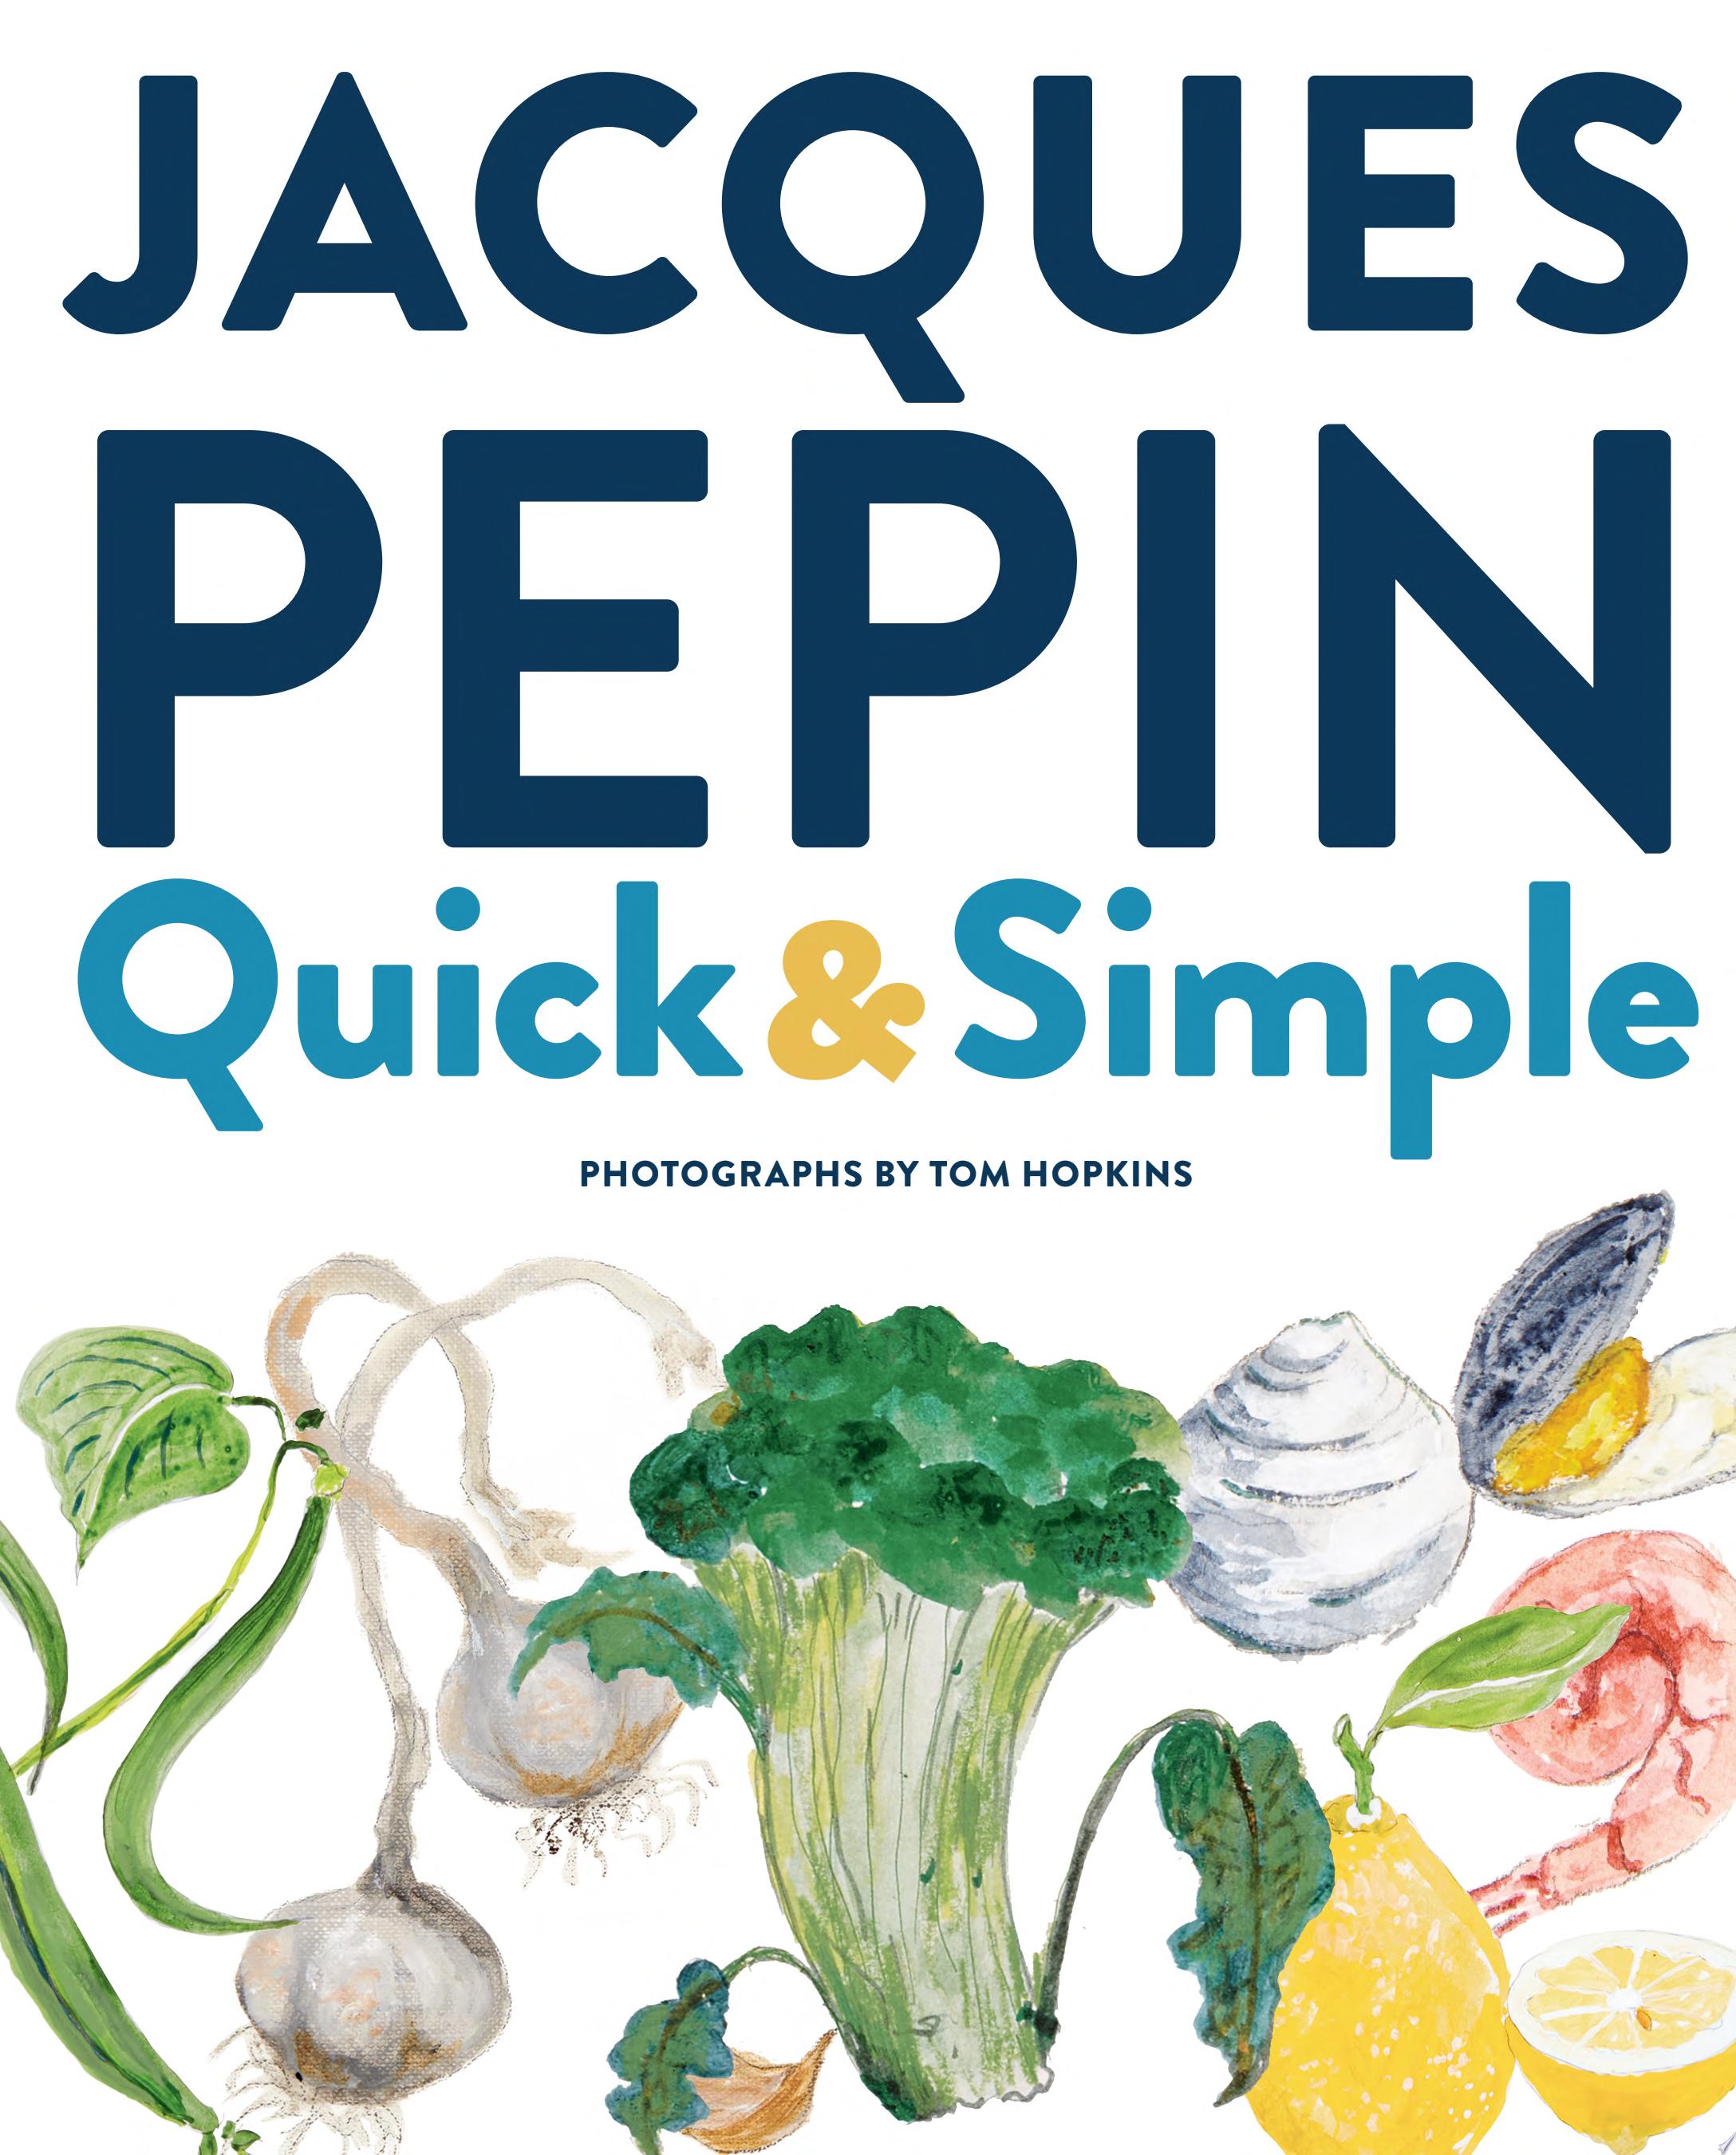 Image for "Jacques Pépin Quick &amp; Simple"